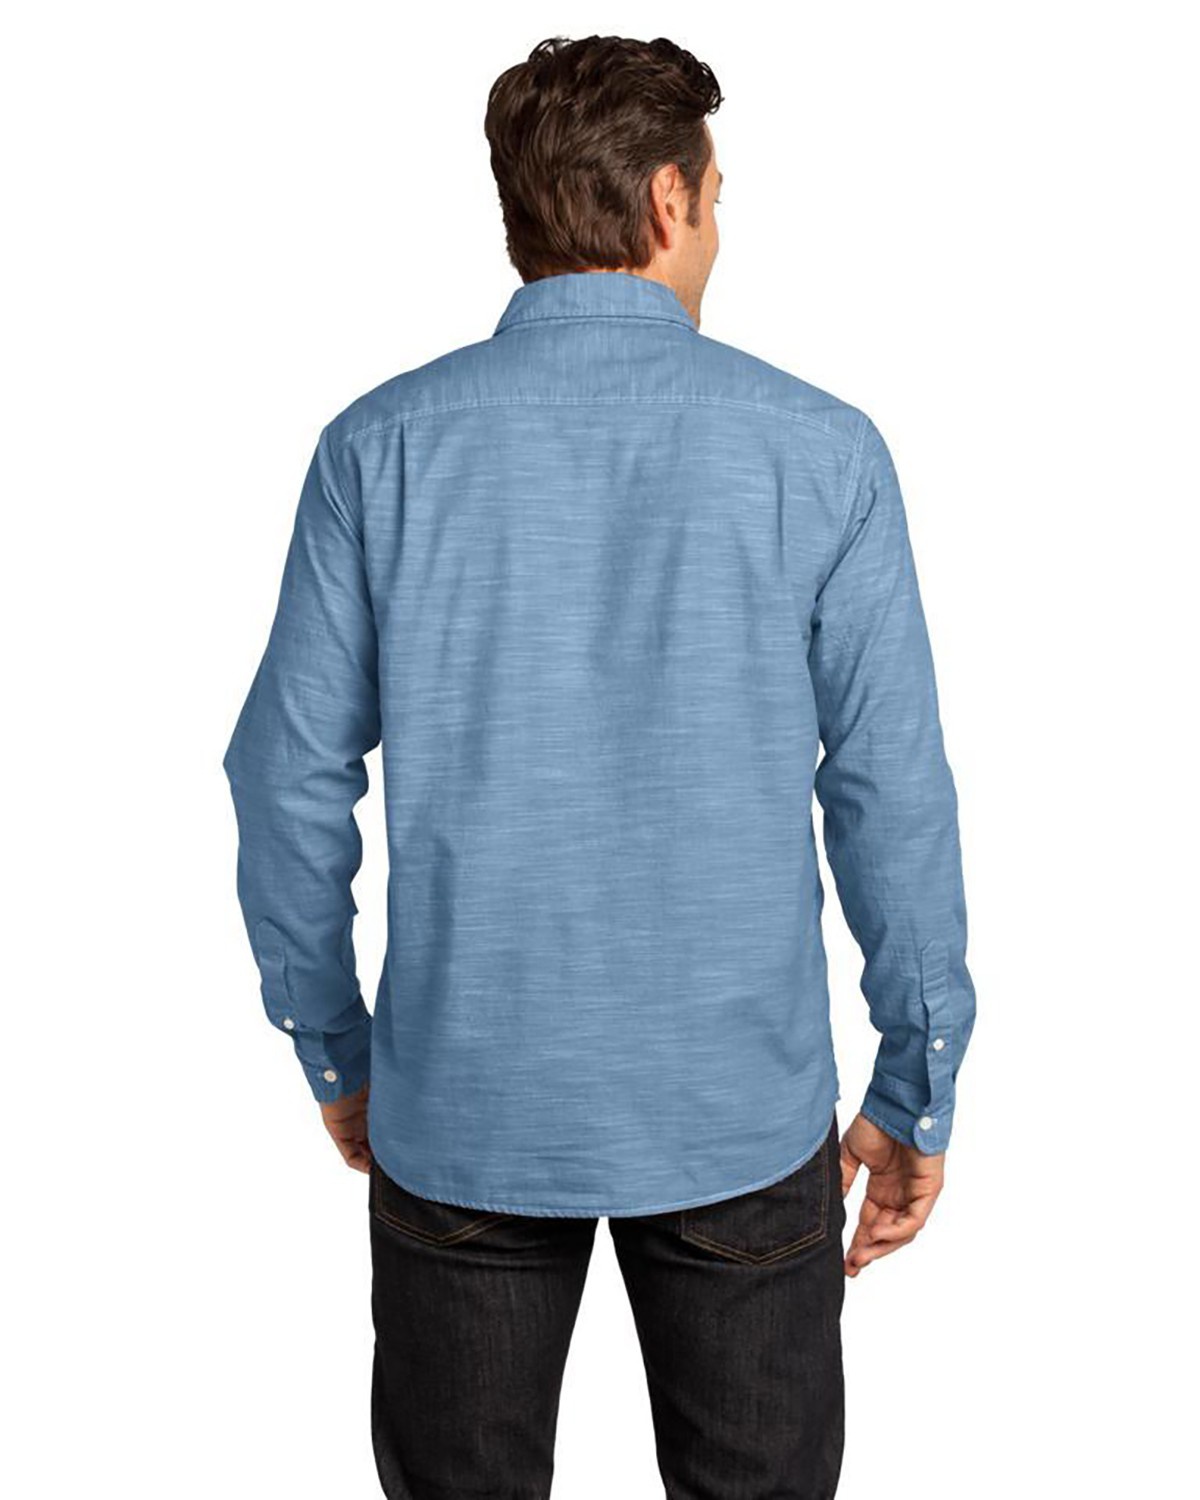 'District DM3800 Mens Long Sleeve Washed Woven Shirt'